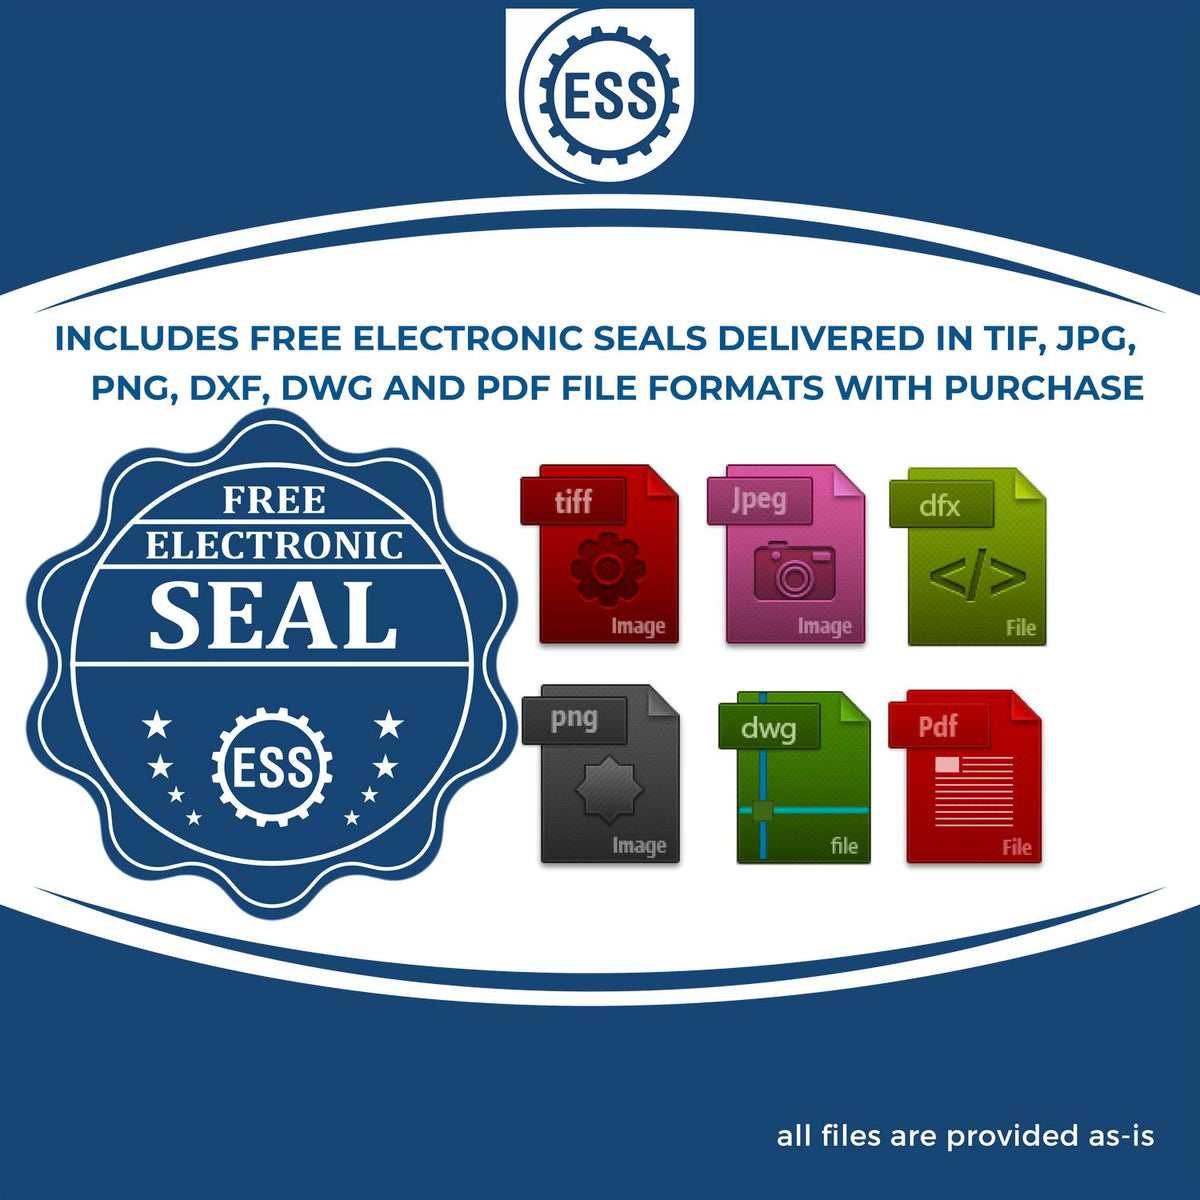 An infographic for the free electronic seal for the Self-Inking New Mexico Geologist Stamp illustrating the different file type icons such as DXF, DWG, TIF, JPG and PNG.